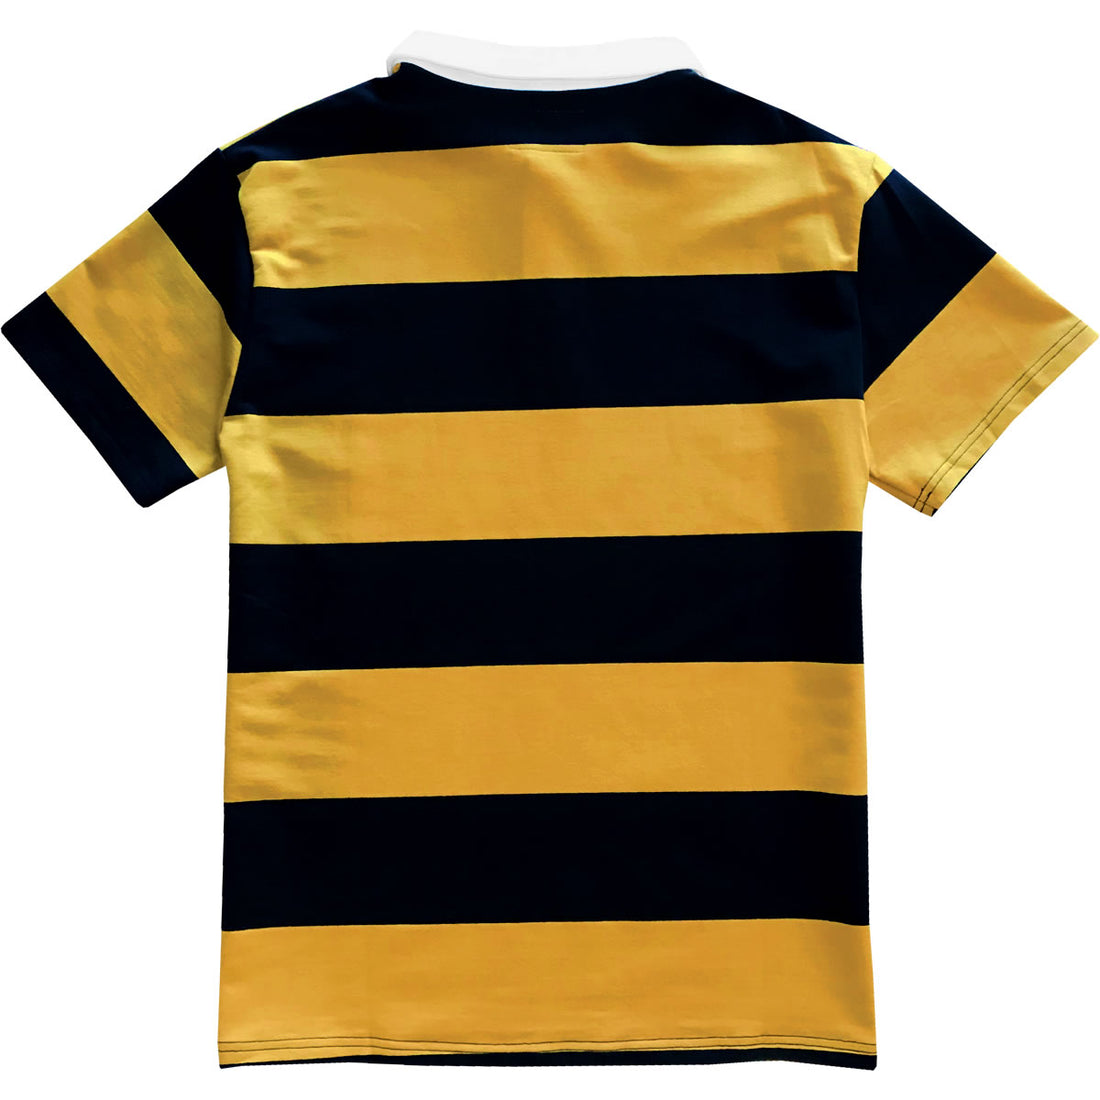 Black and Yellow Short Sleeve Striped Men's Rugby Shirt